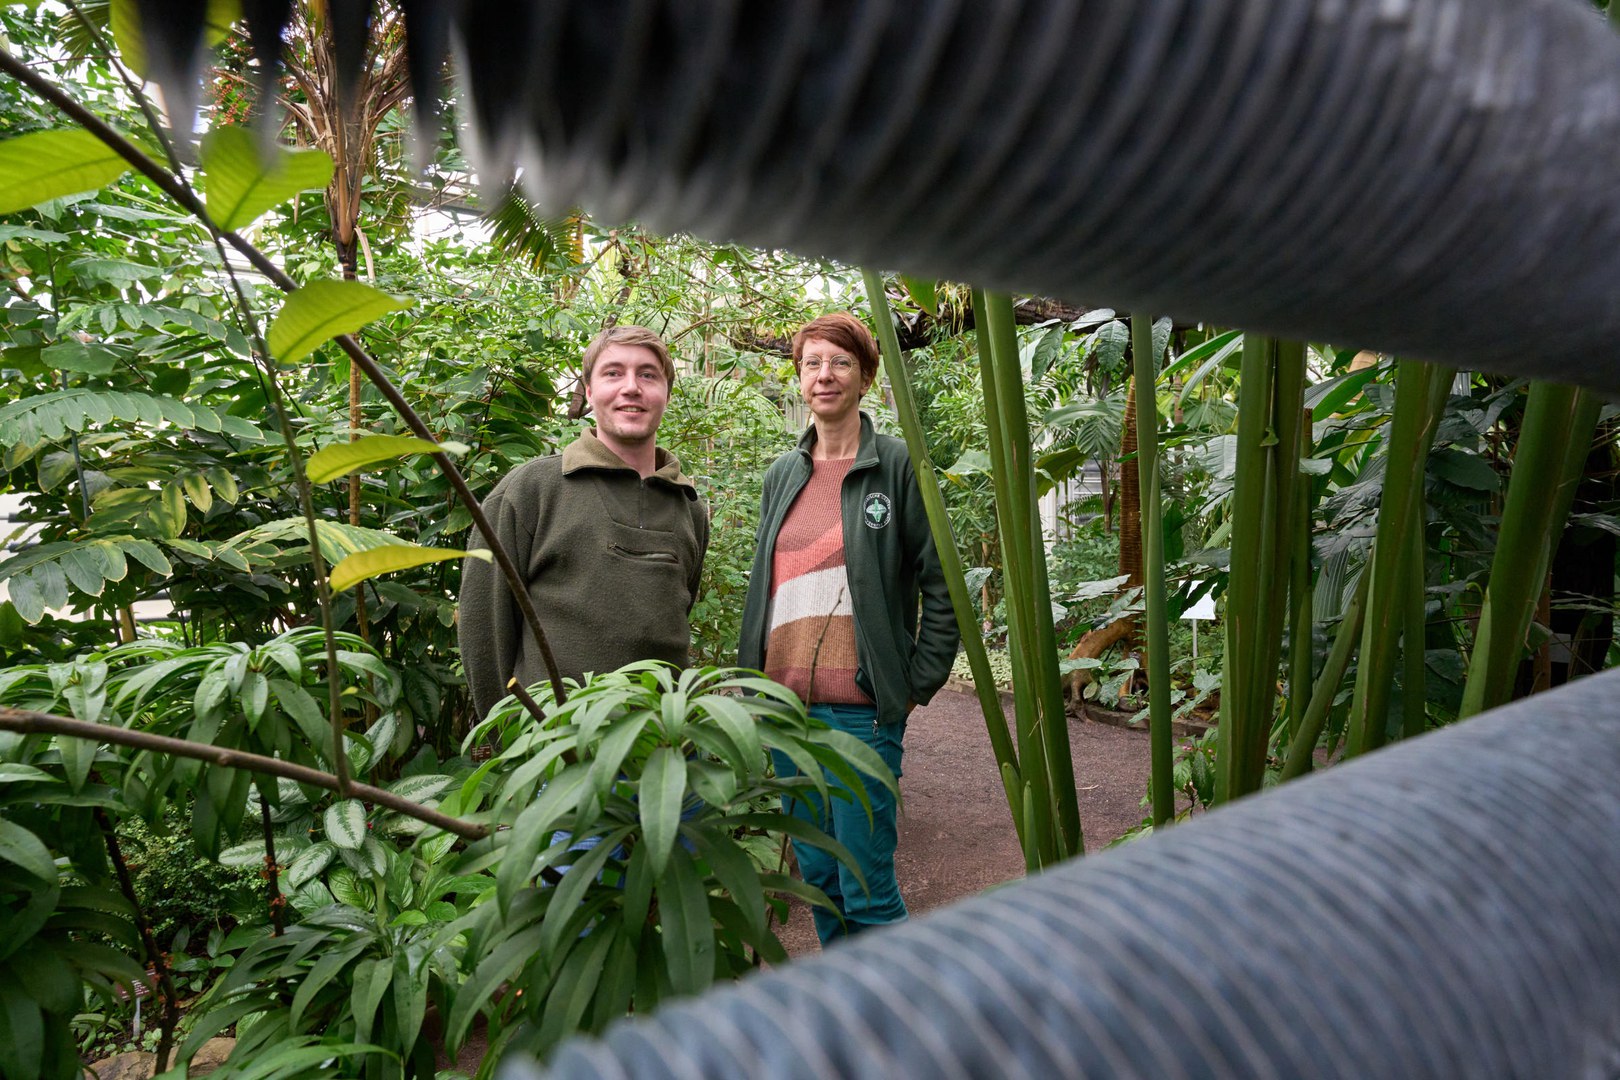 Cornelia Löhne is standing in the rainforest greenhouse with master gardener Patrick Bartsch, who is responsible for the heating system.   In the foreground is one of the heating elements that provides the tropical temperatures.